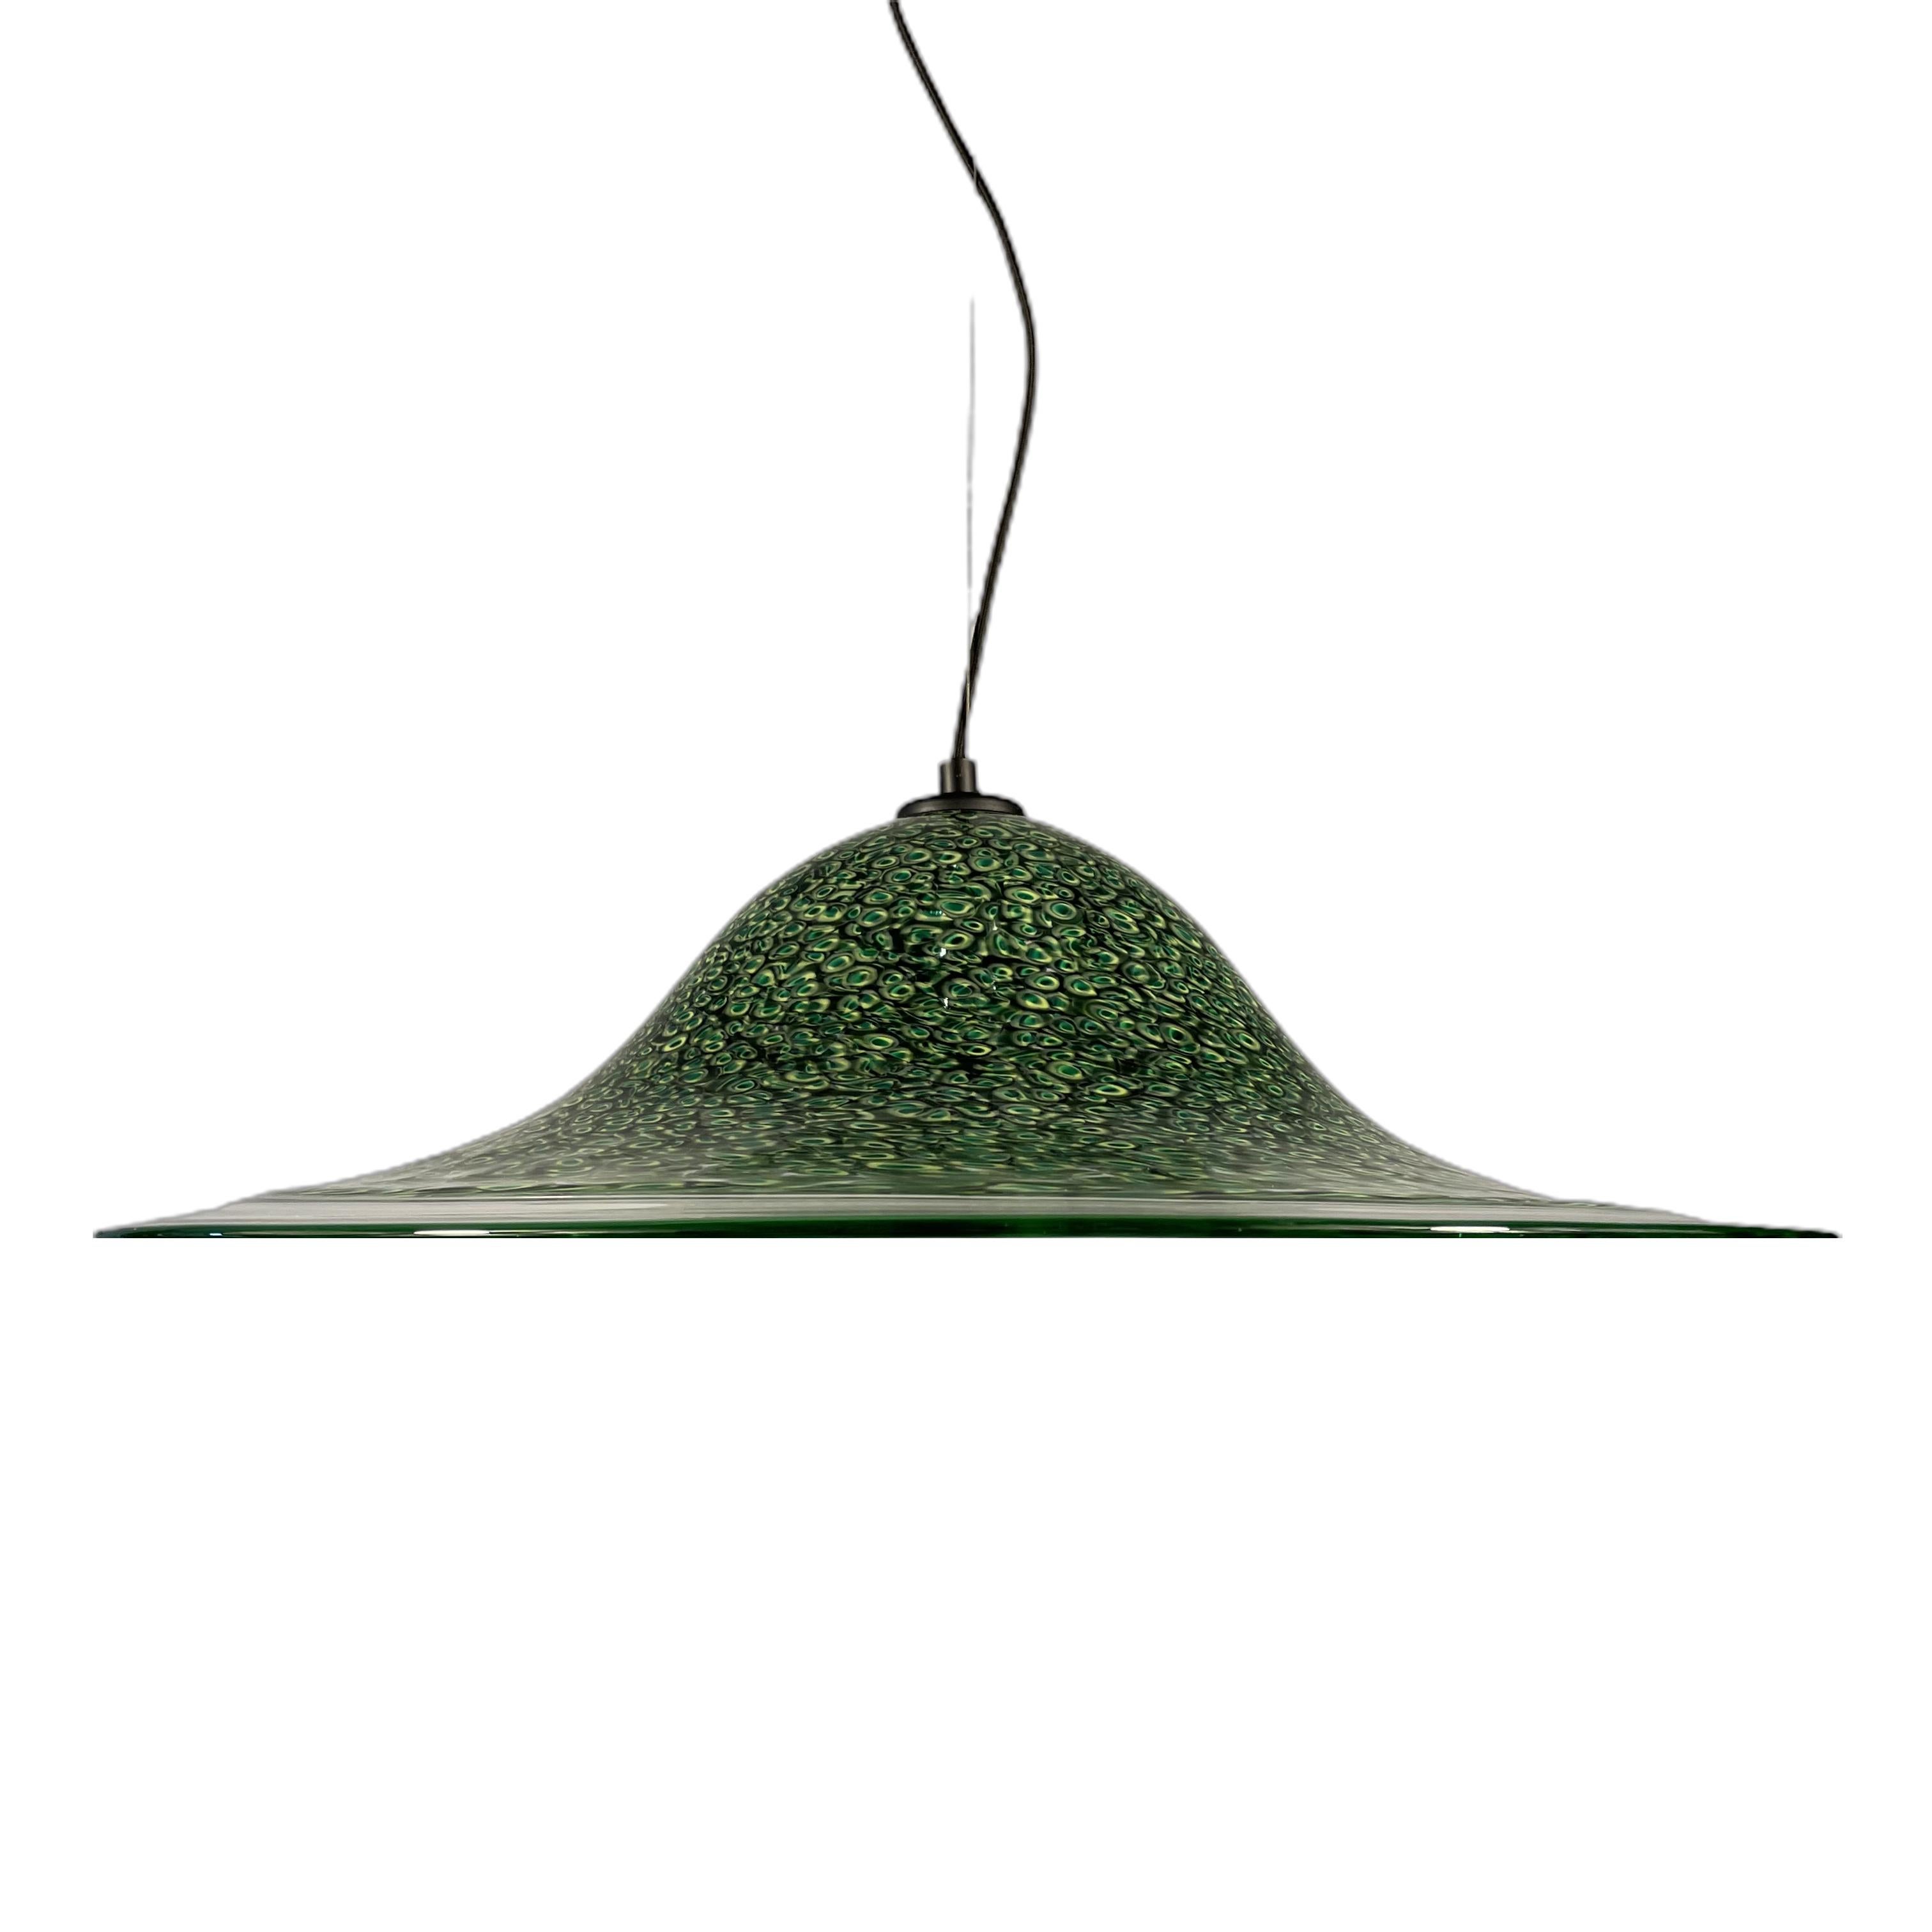 New old stock!
This suspended lamp is an impressive work of art in Murano glass designed by the renowned designer Gae Aulenti and produced by the Italian company Luciano Vistosi in the 1970s. The buffed Murano glass in a beautiful deep green tone